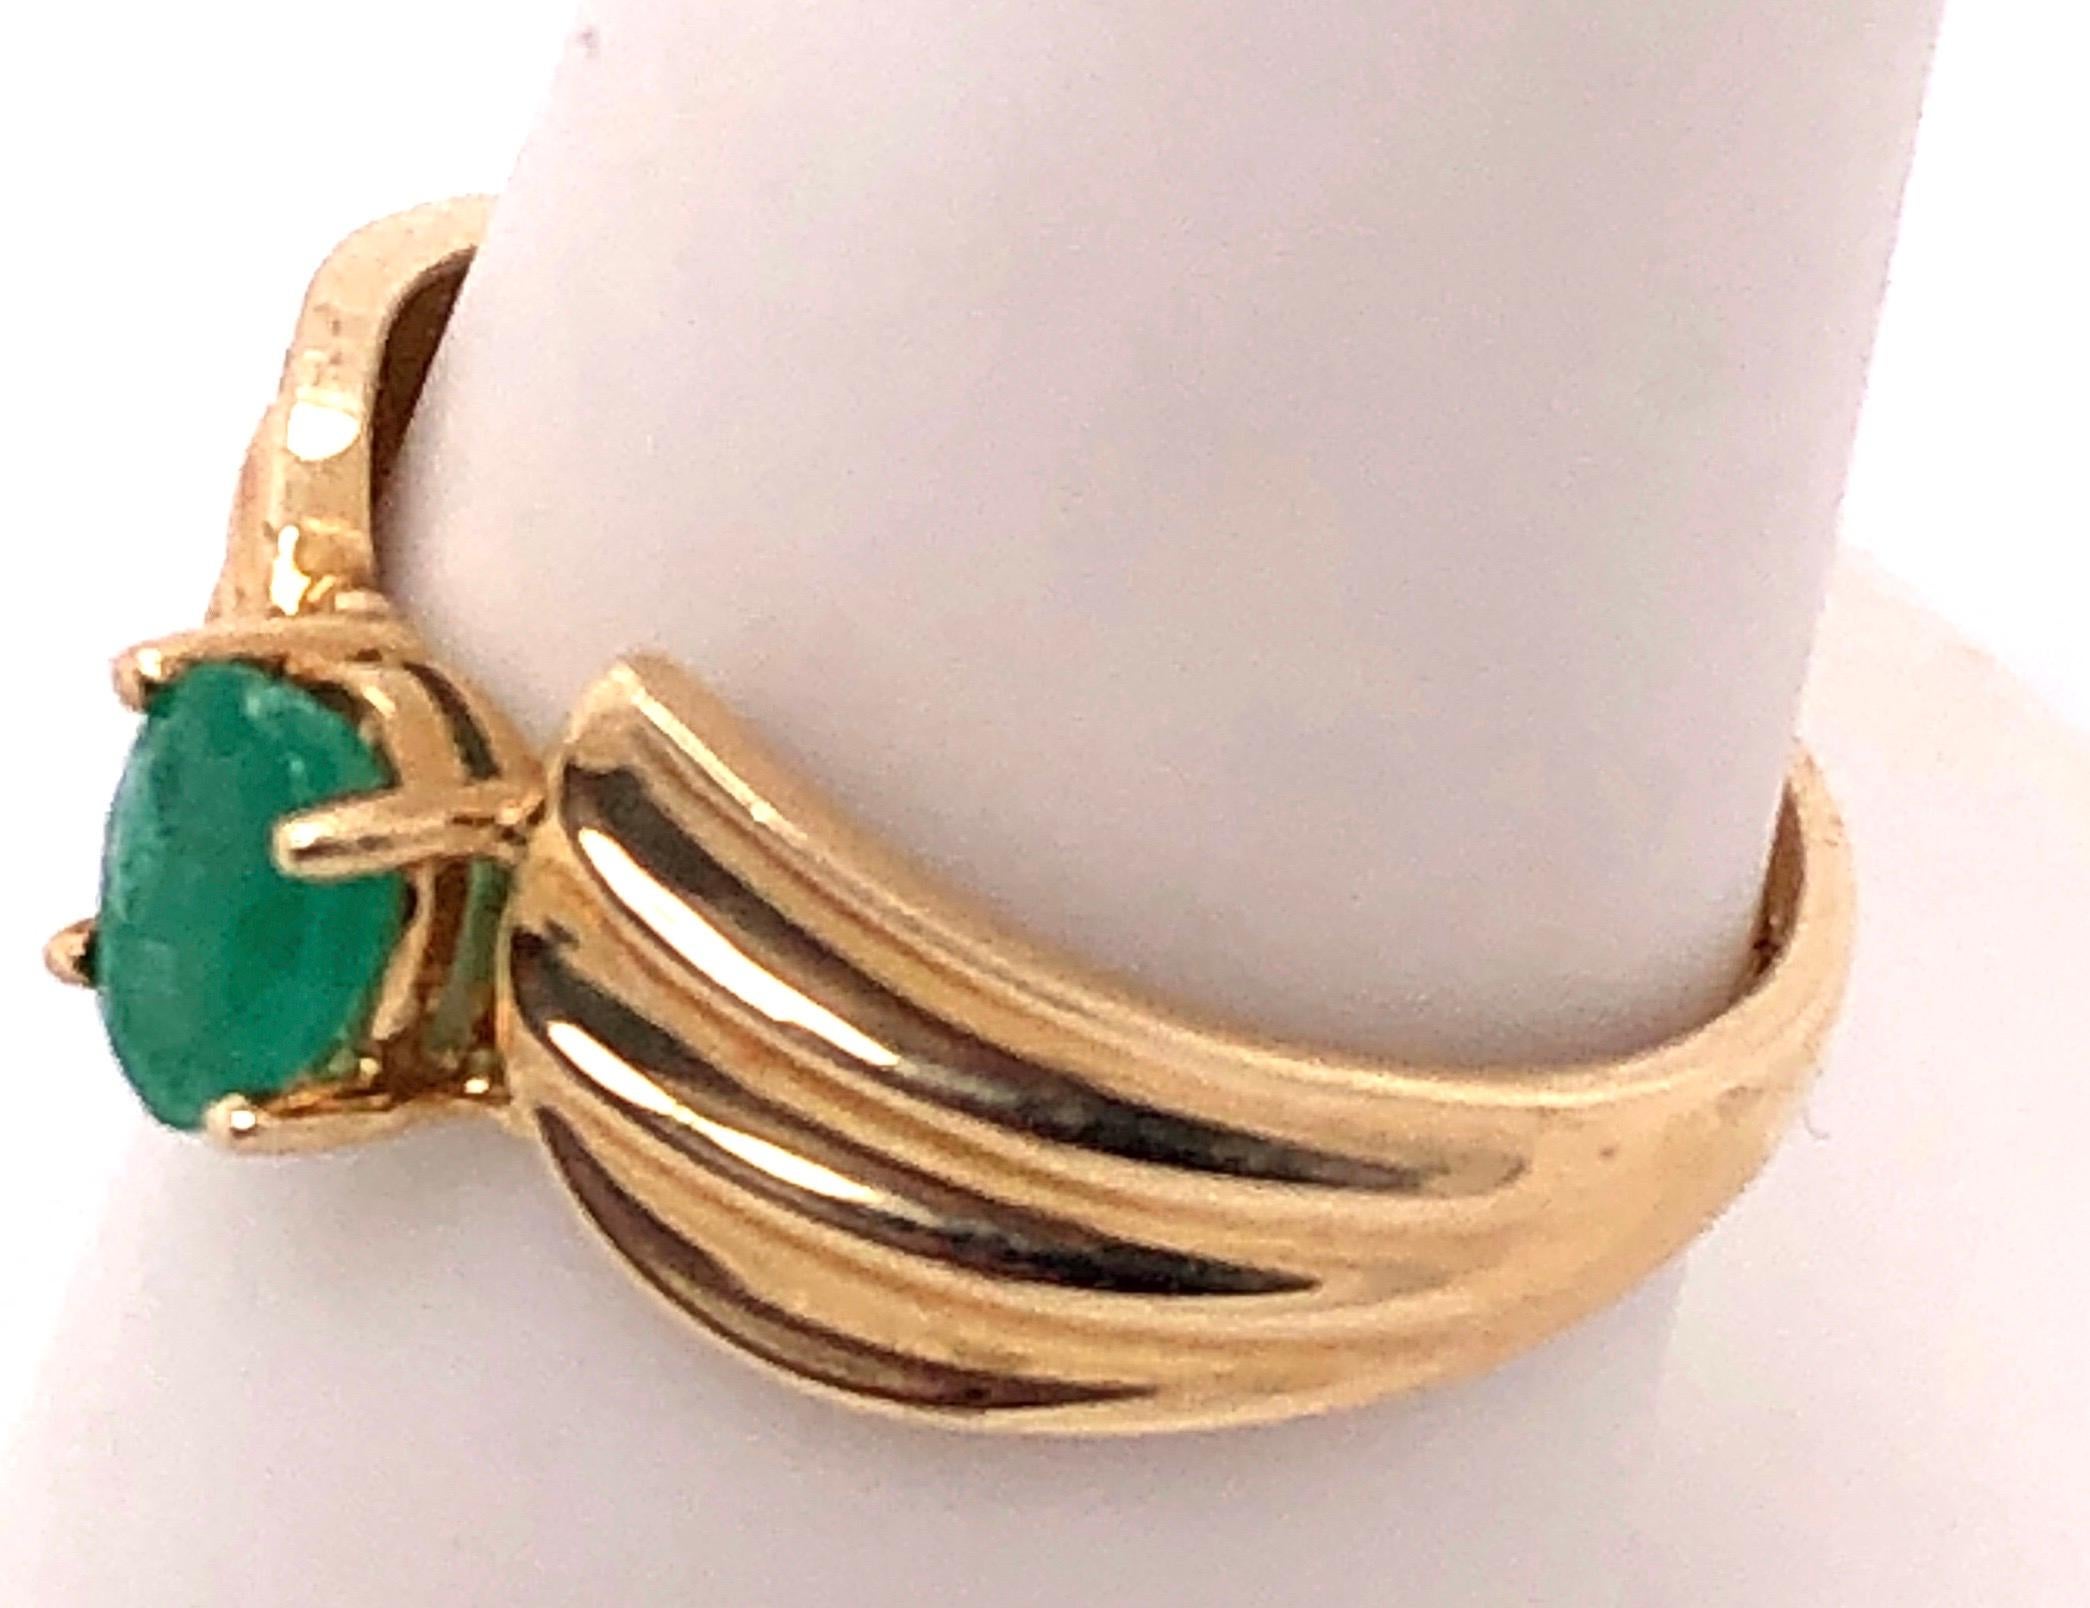 14 Karat Yellow Gold Free Form Oval Emerald Ring.
Size 9
3 grams total weight.